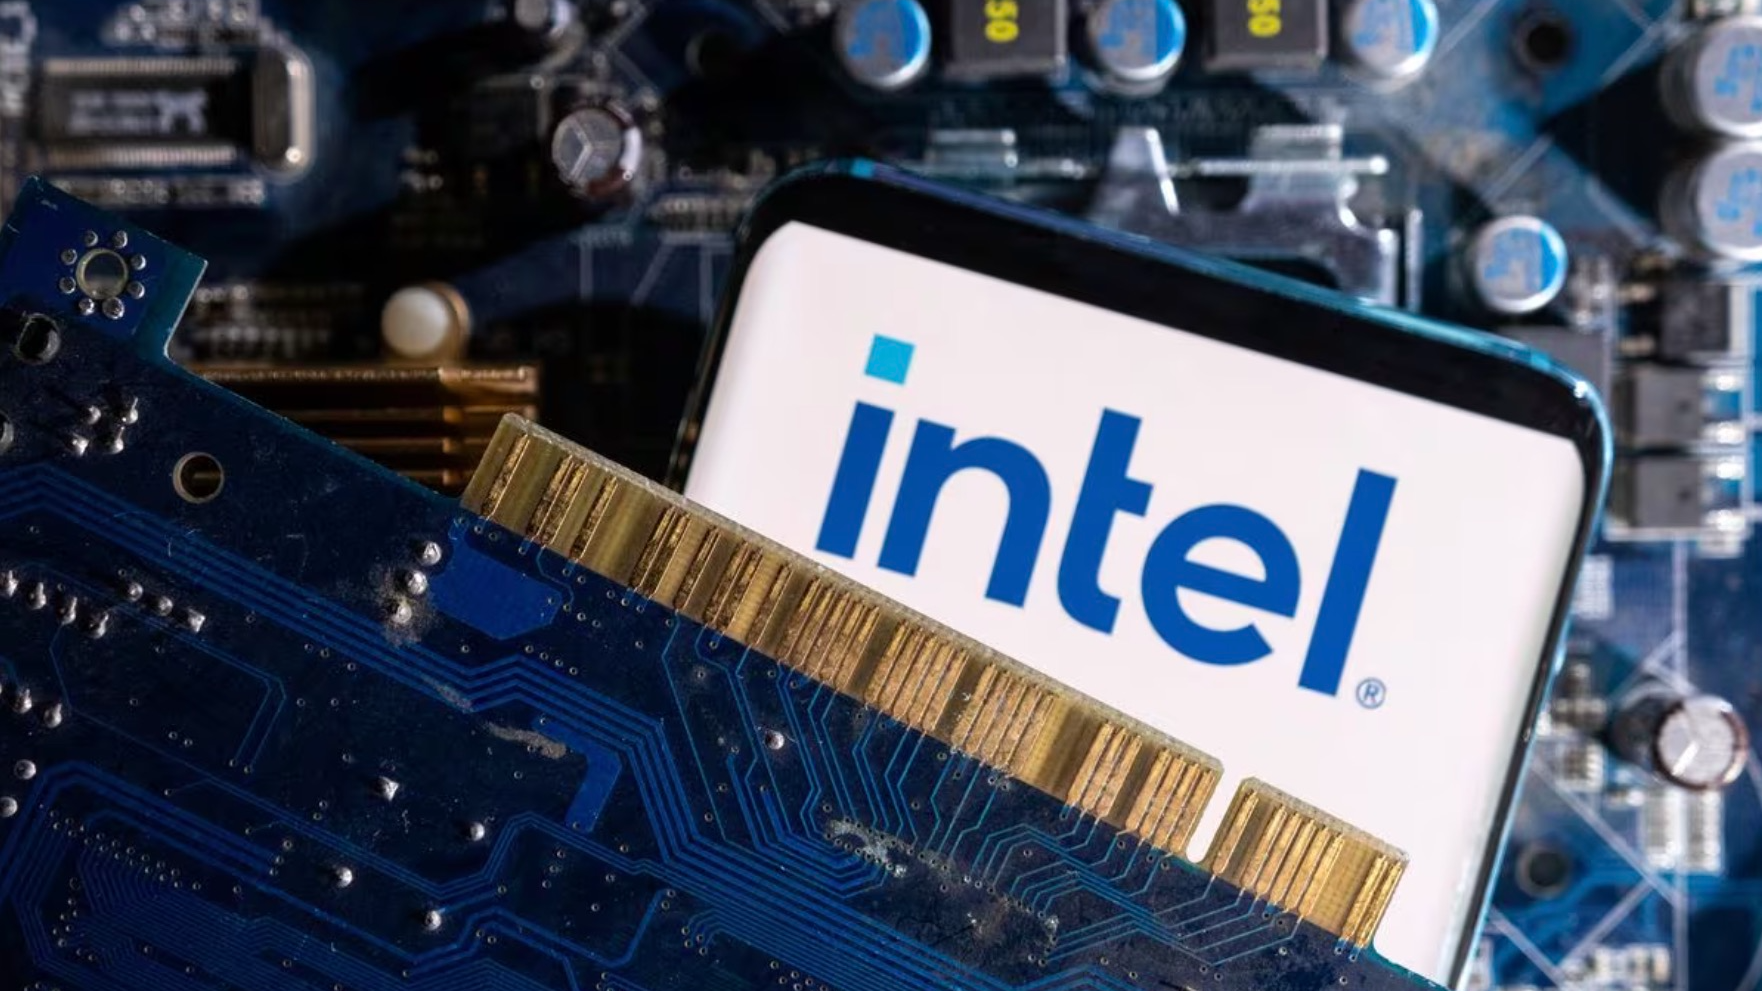 An illustration showing a smartphone with a displayed Intel logo is placed on a computer motherboard, March 6, 2023. /Reuters